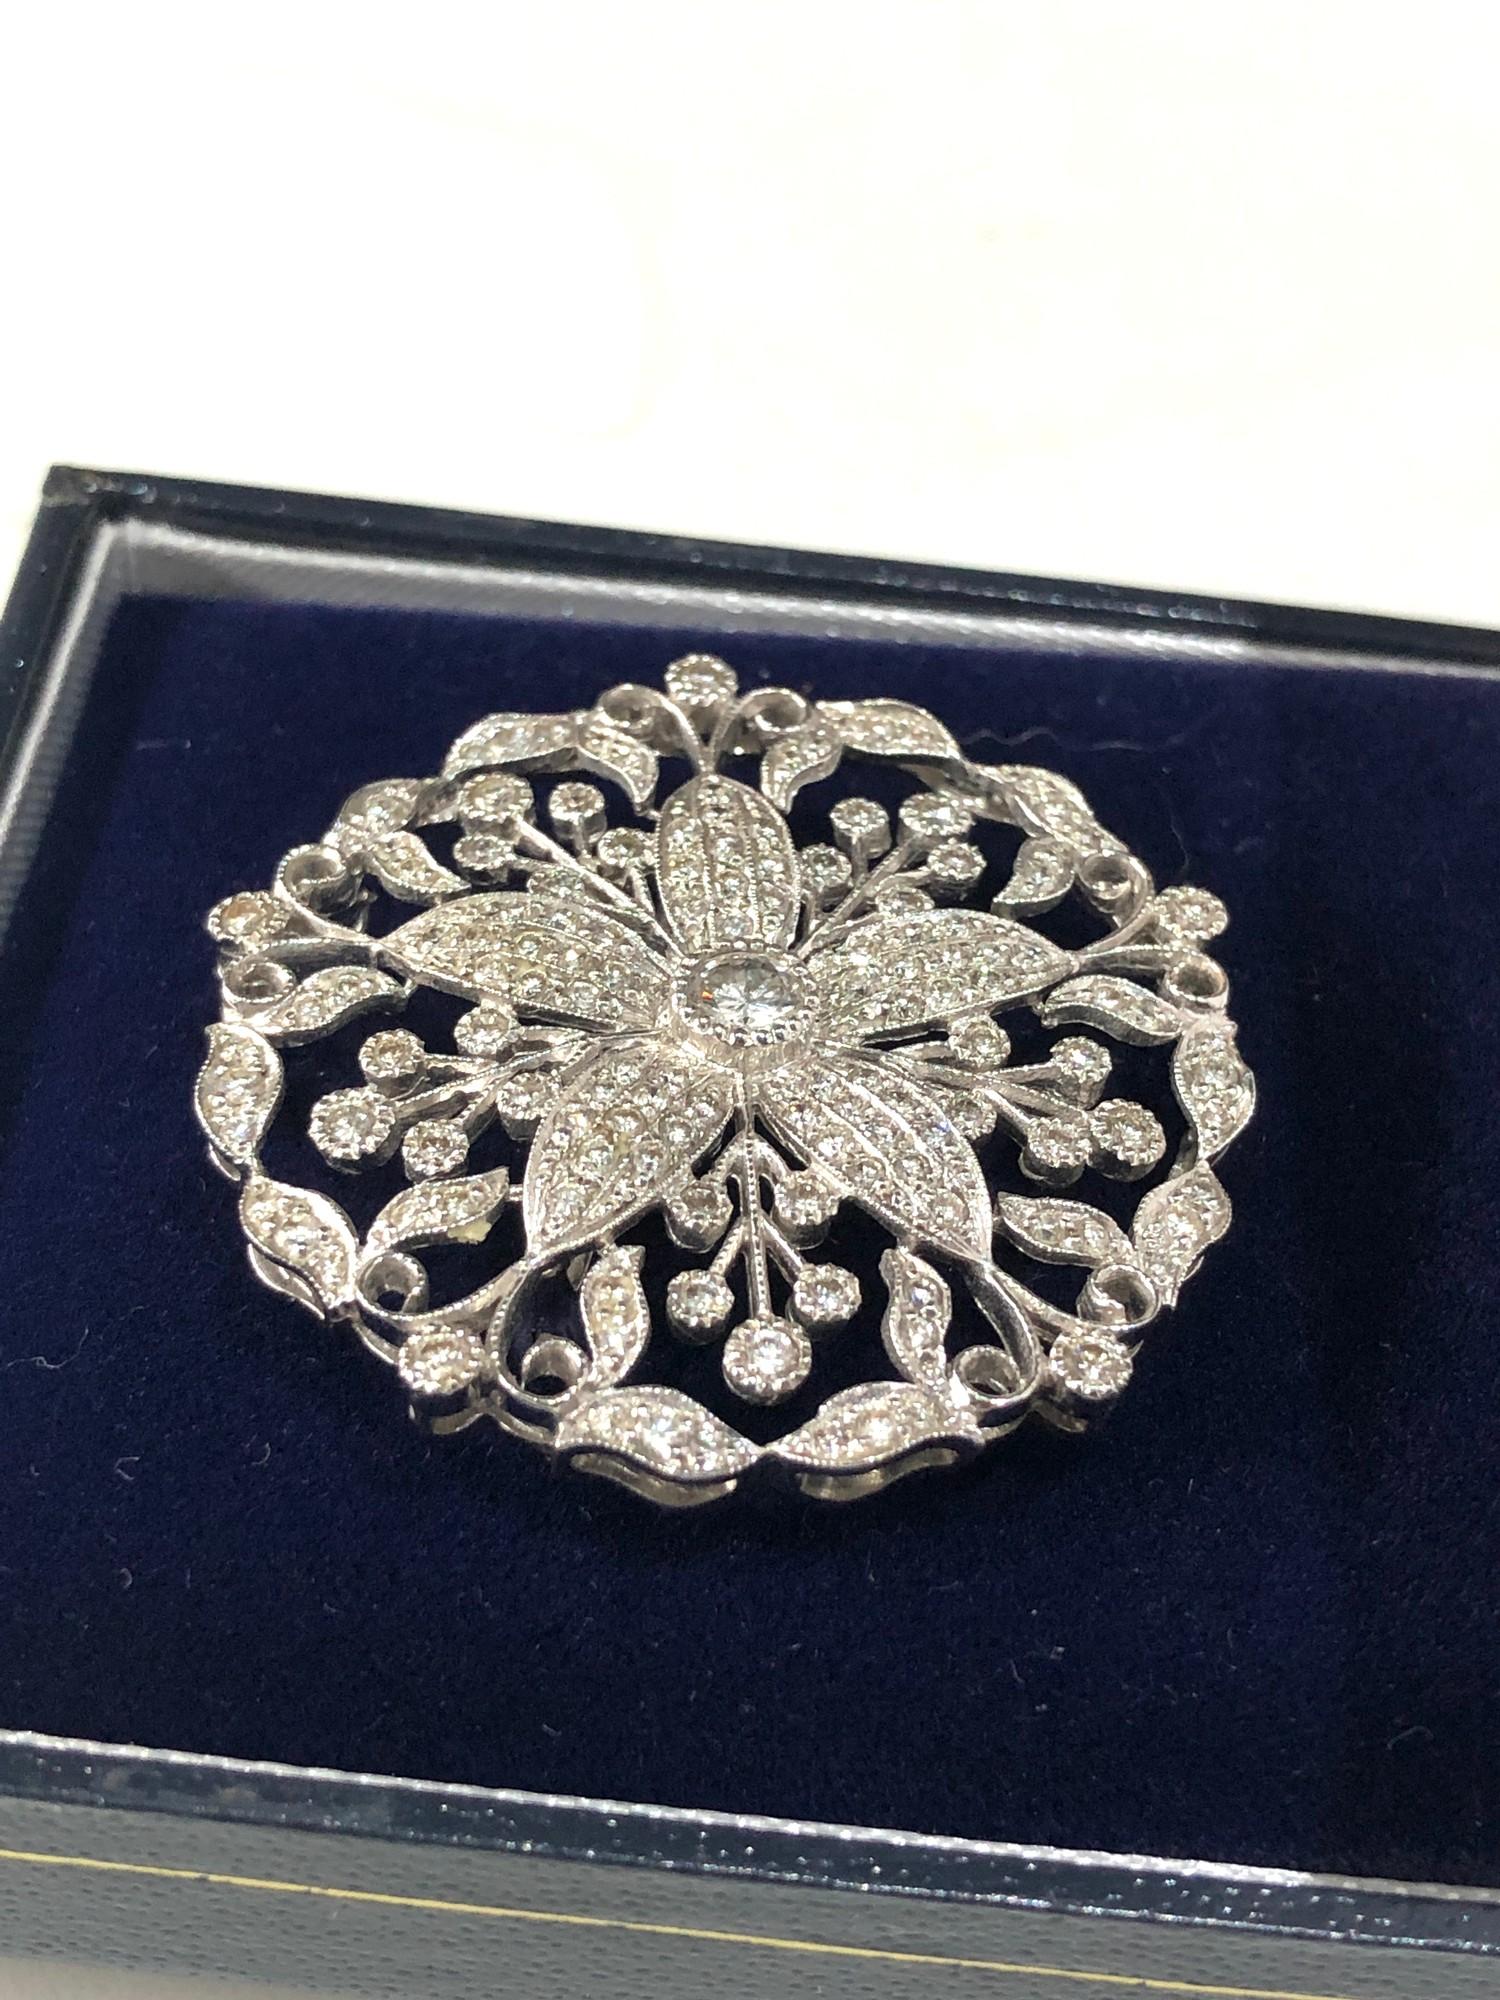 Fine antique white gold / plat floral diamond pendant pin brooch central diamond measures approx 4mm - Image 5 of 5